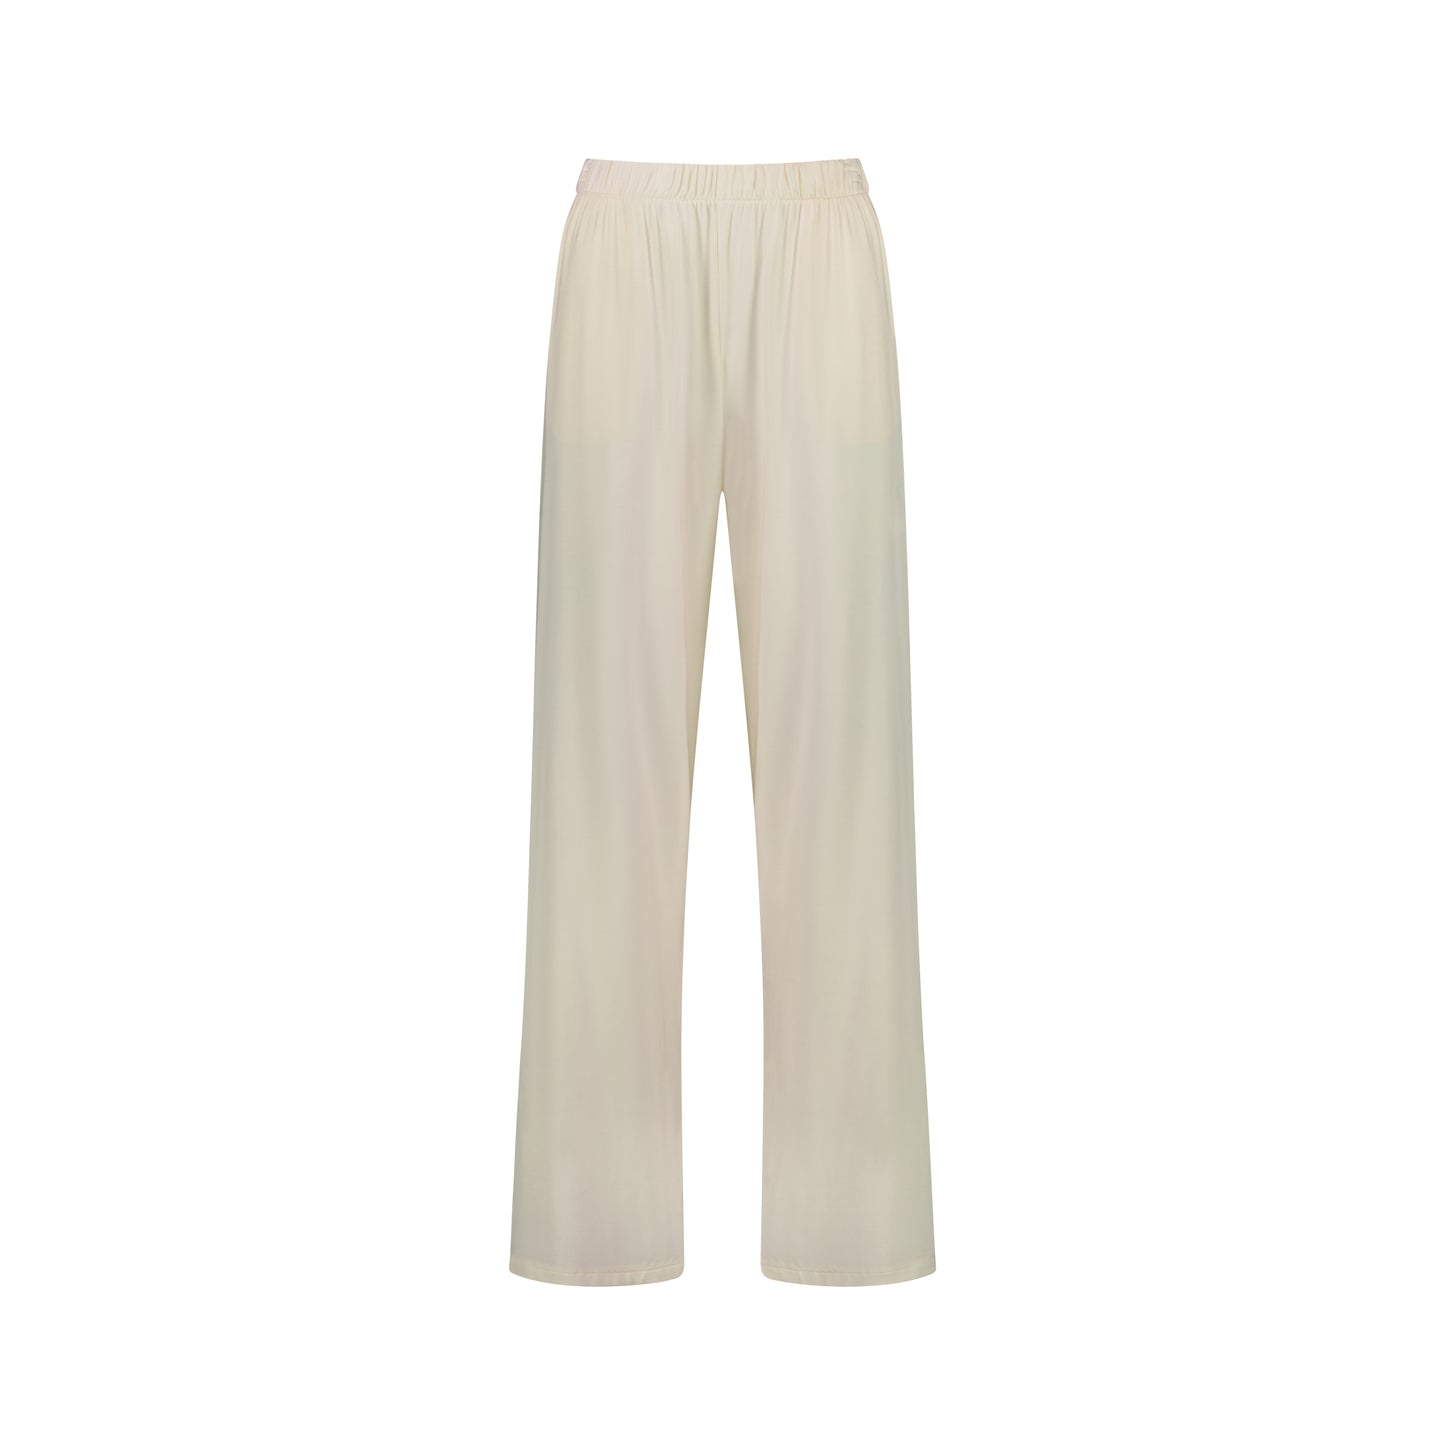 Essential Lounge Pant Modal